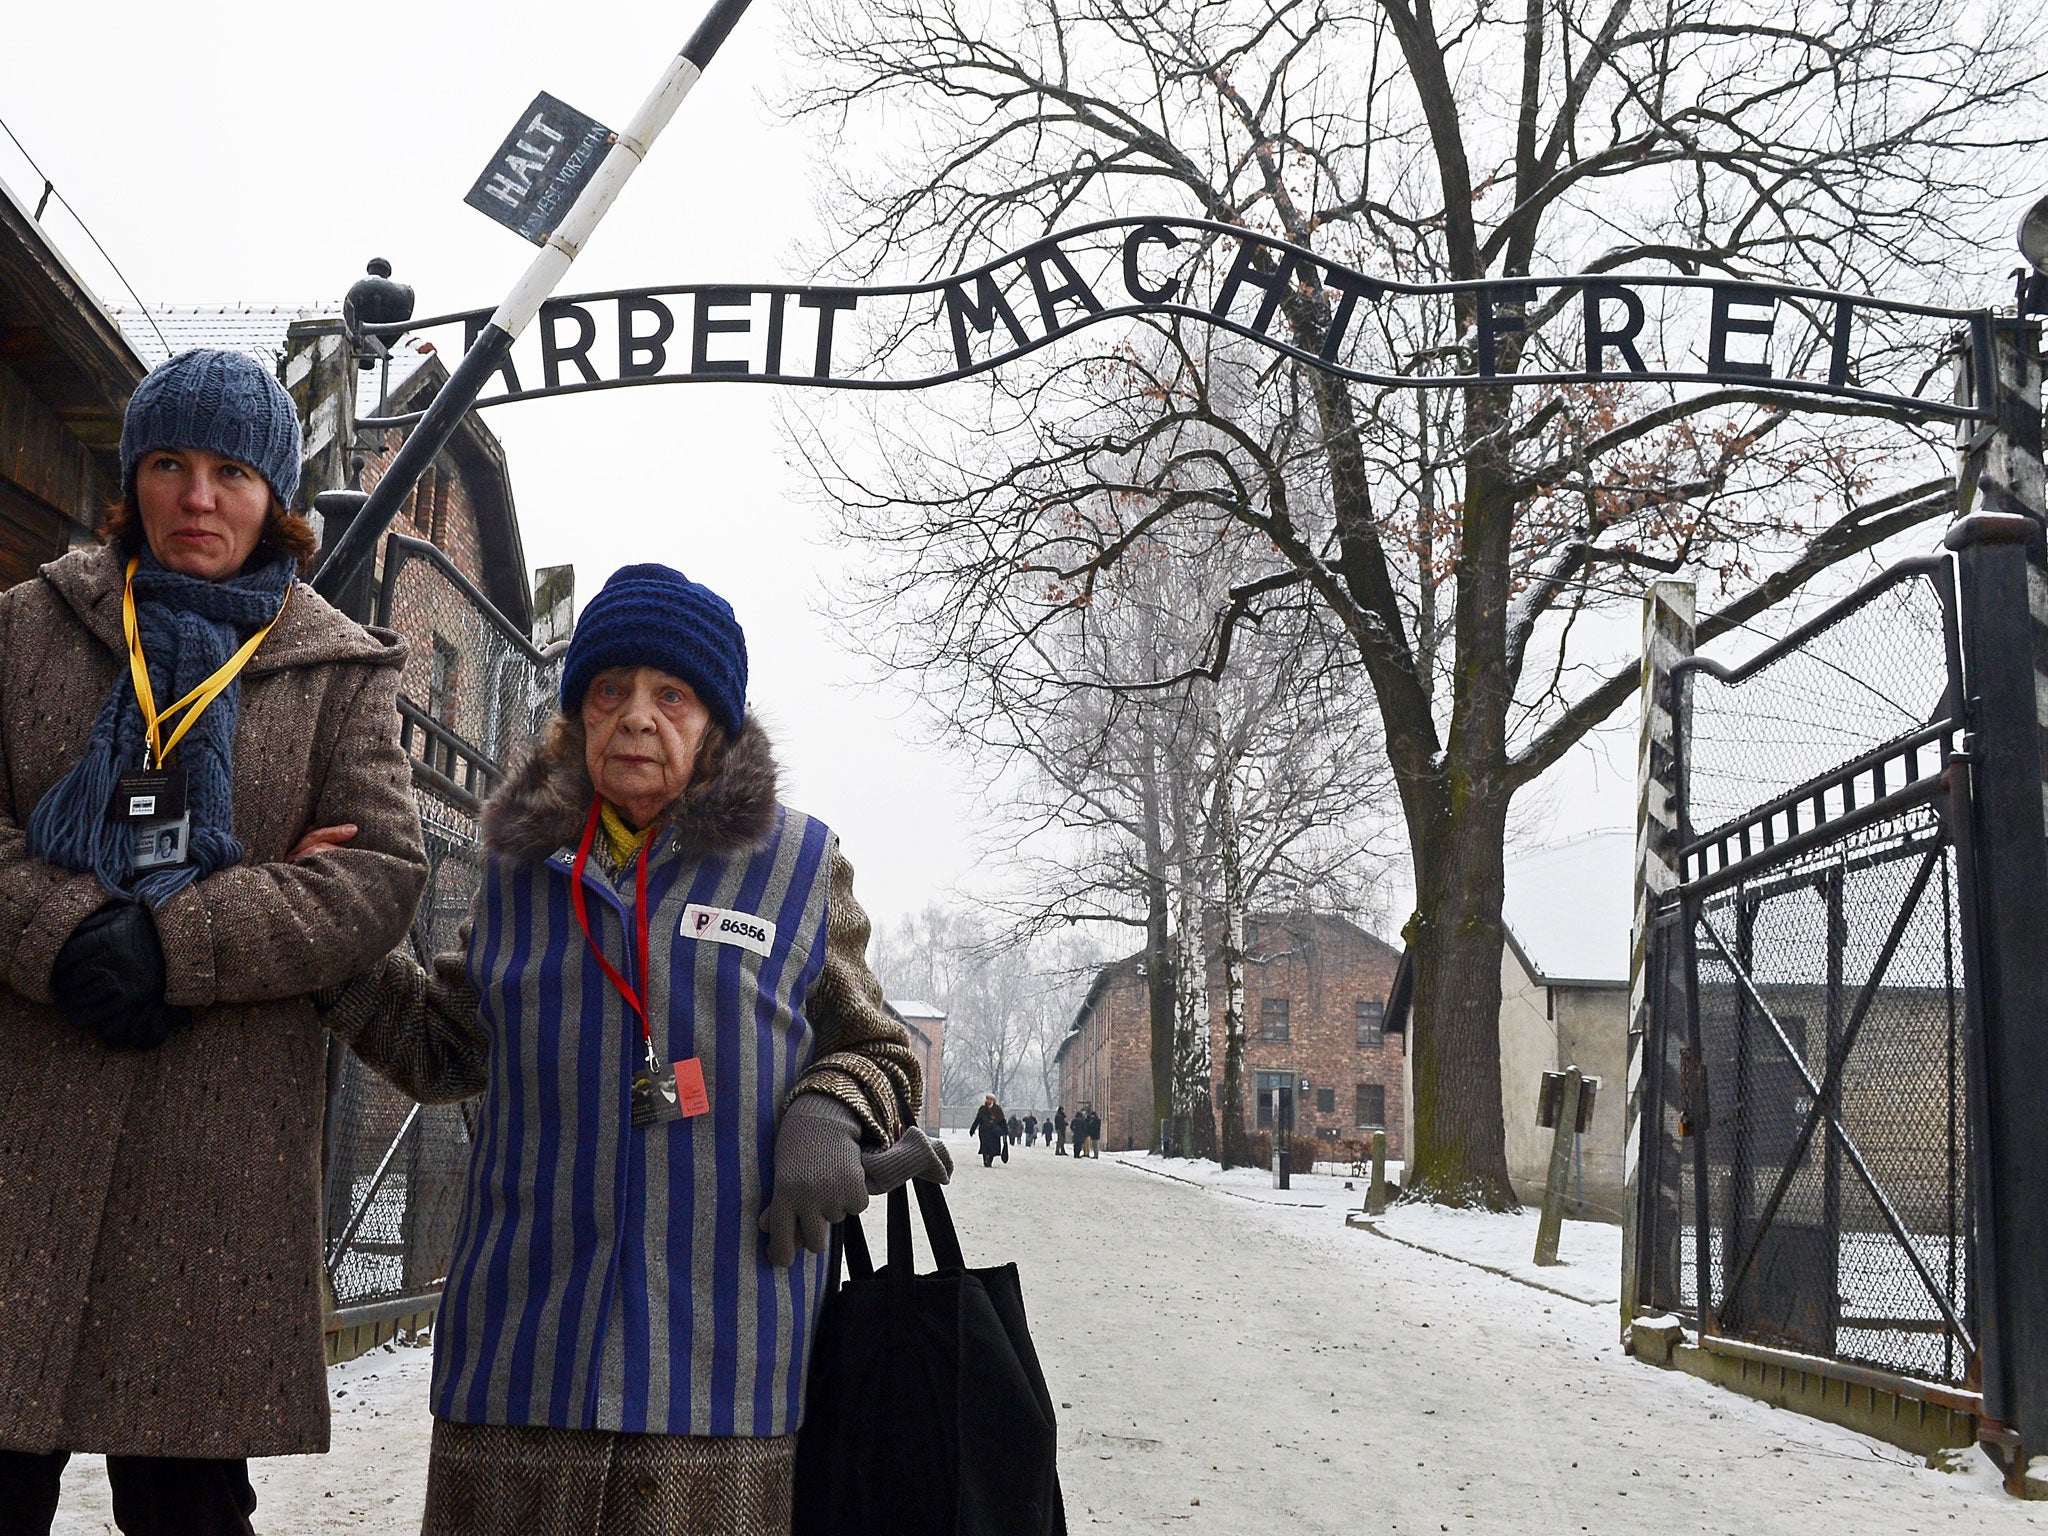 Former concentration camp prisoners attend a ceremony at the memorial site of the former Nazi concentration camp Auschwitz-Birkenau in Oswiecim, Poland, on Holocaust Day, January 27, 2014. The ceremony took place 69 years after the liberation of the death